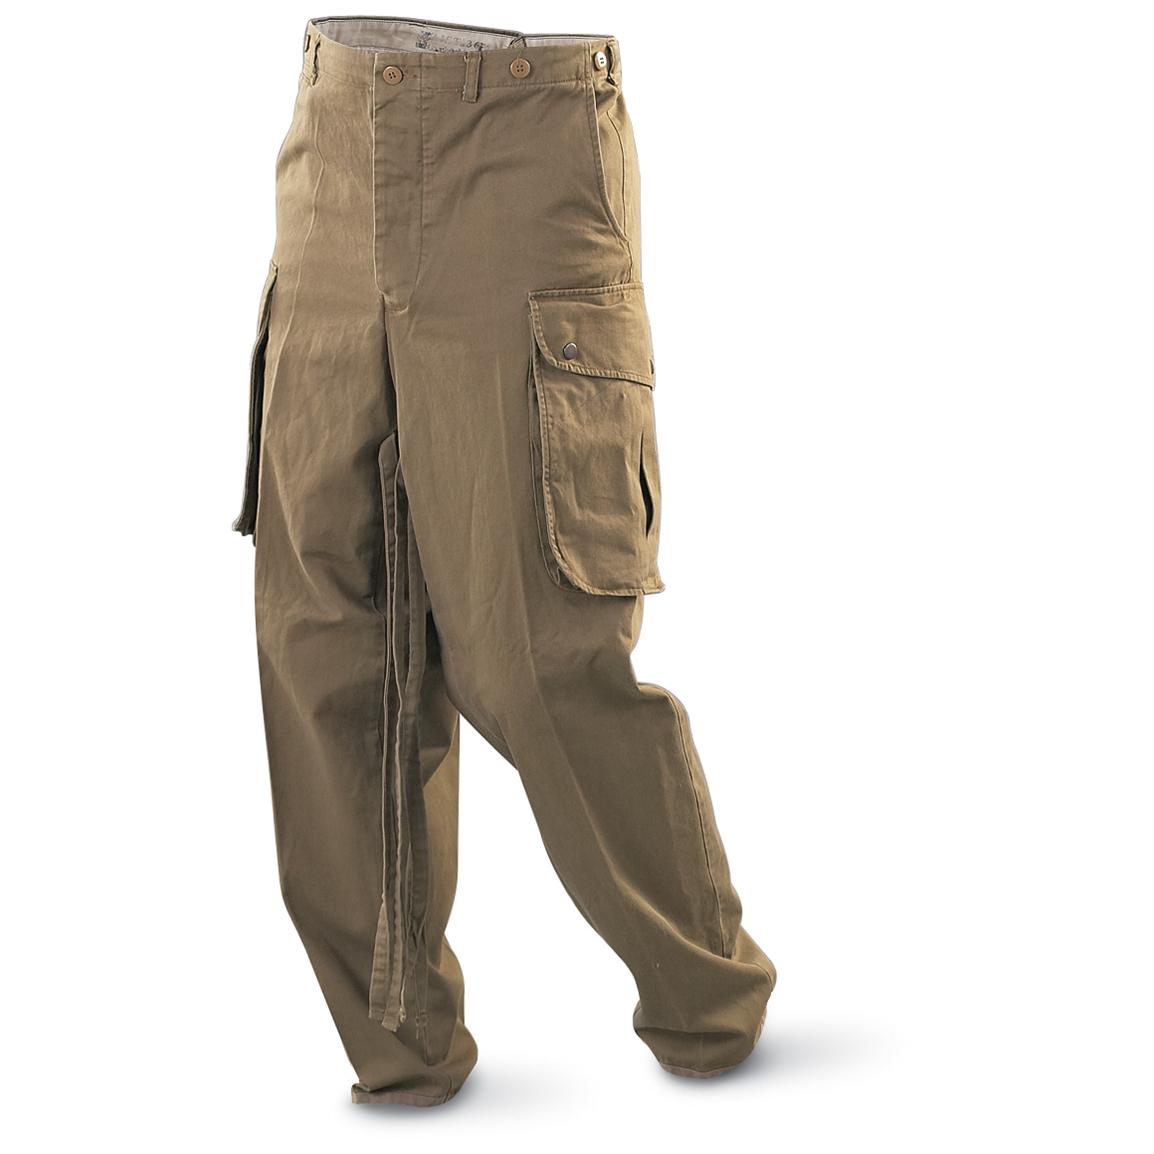 Reproduction U.S. WWII M42 Paratrooper Pants, Olive Drab - 104680 ...